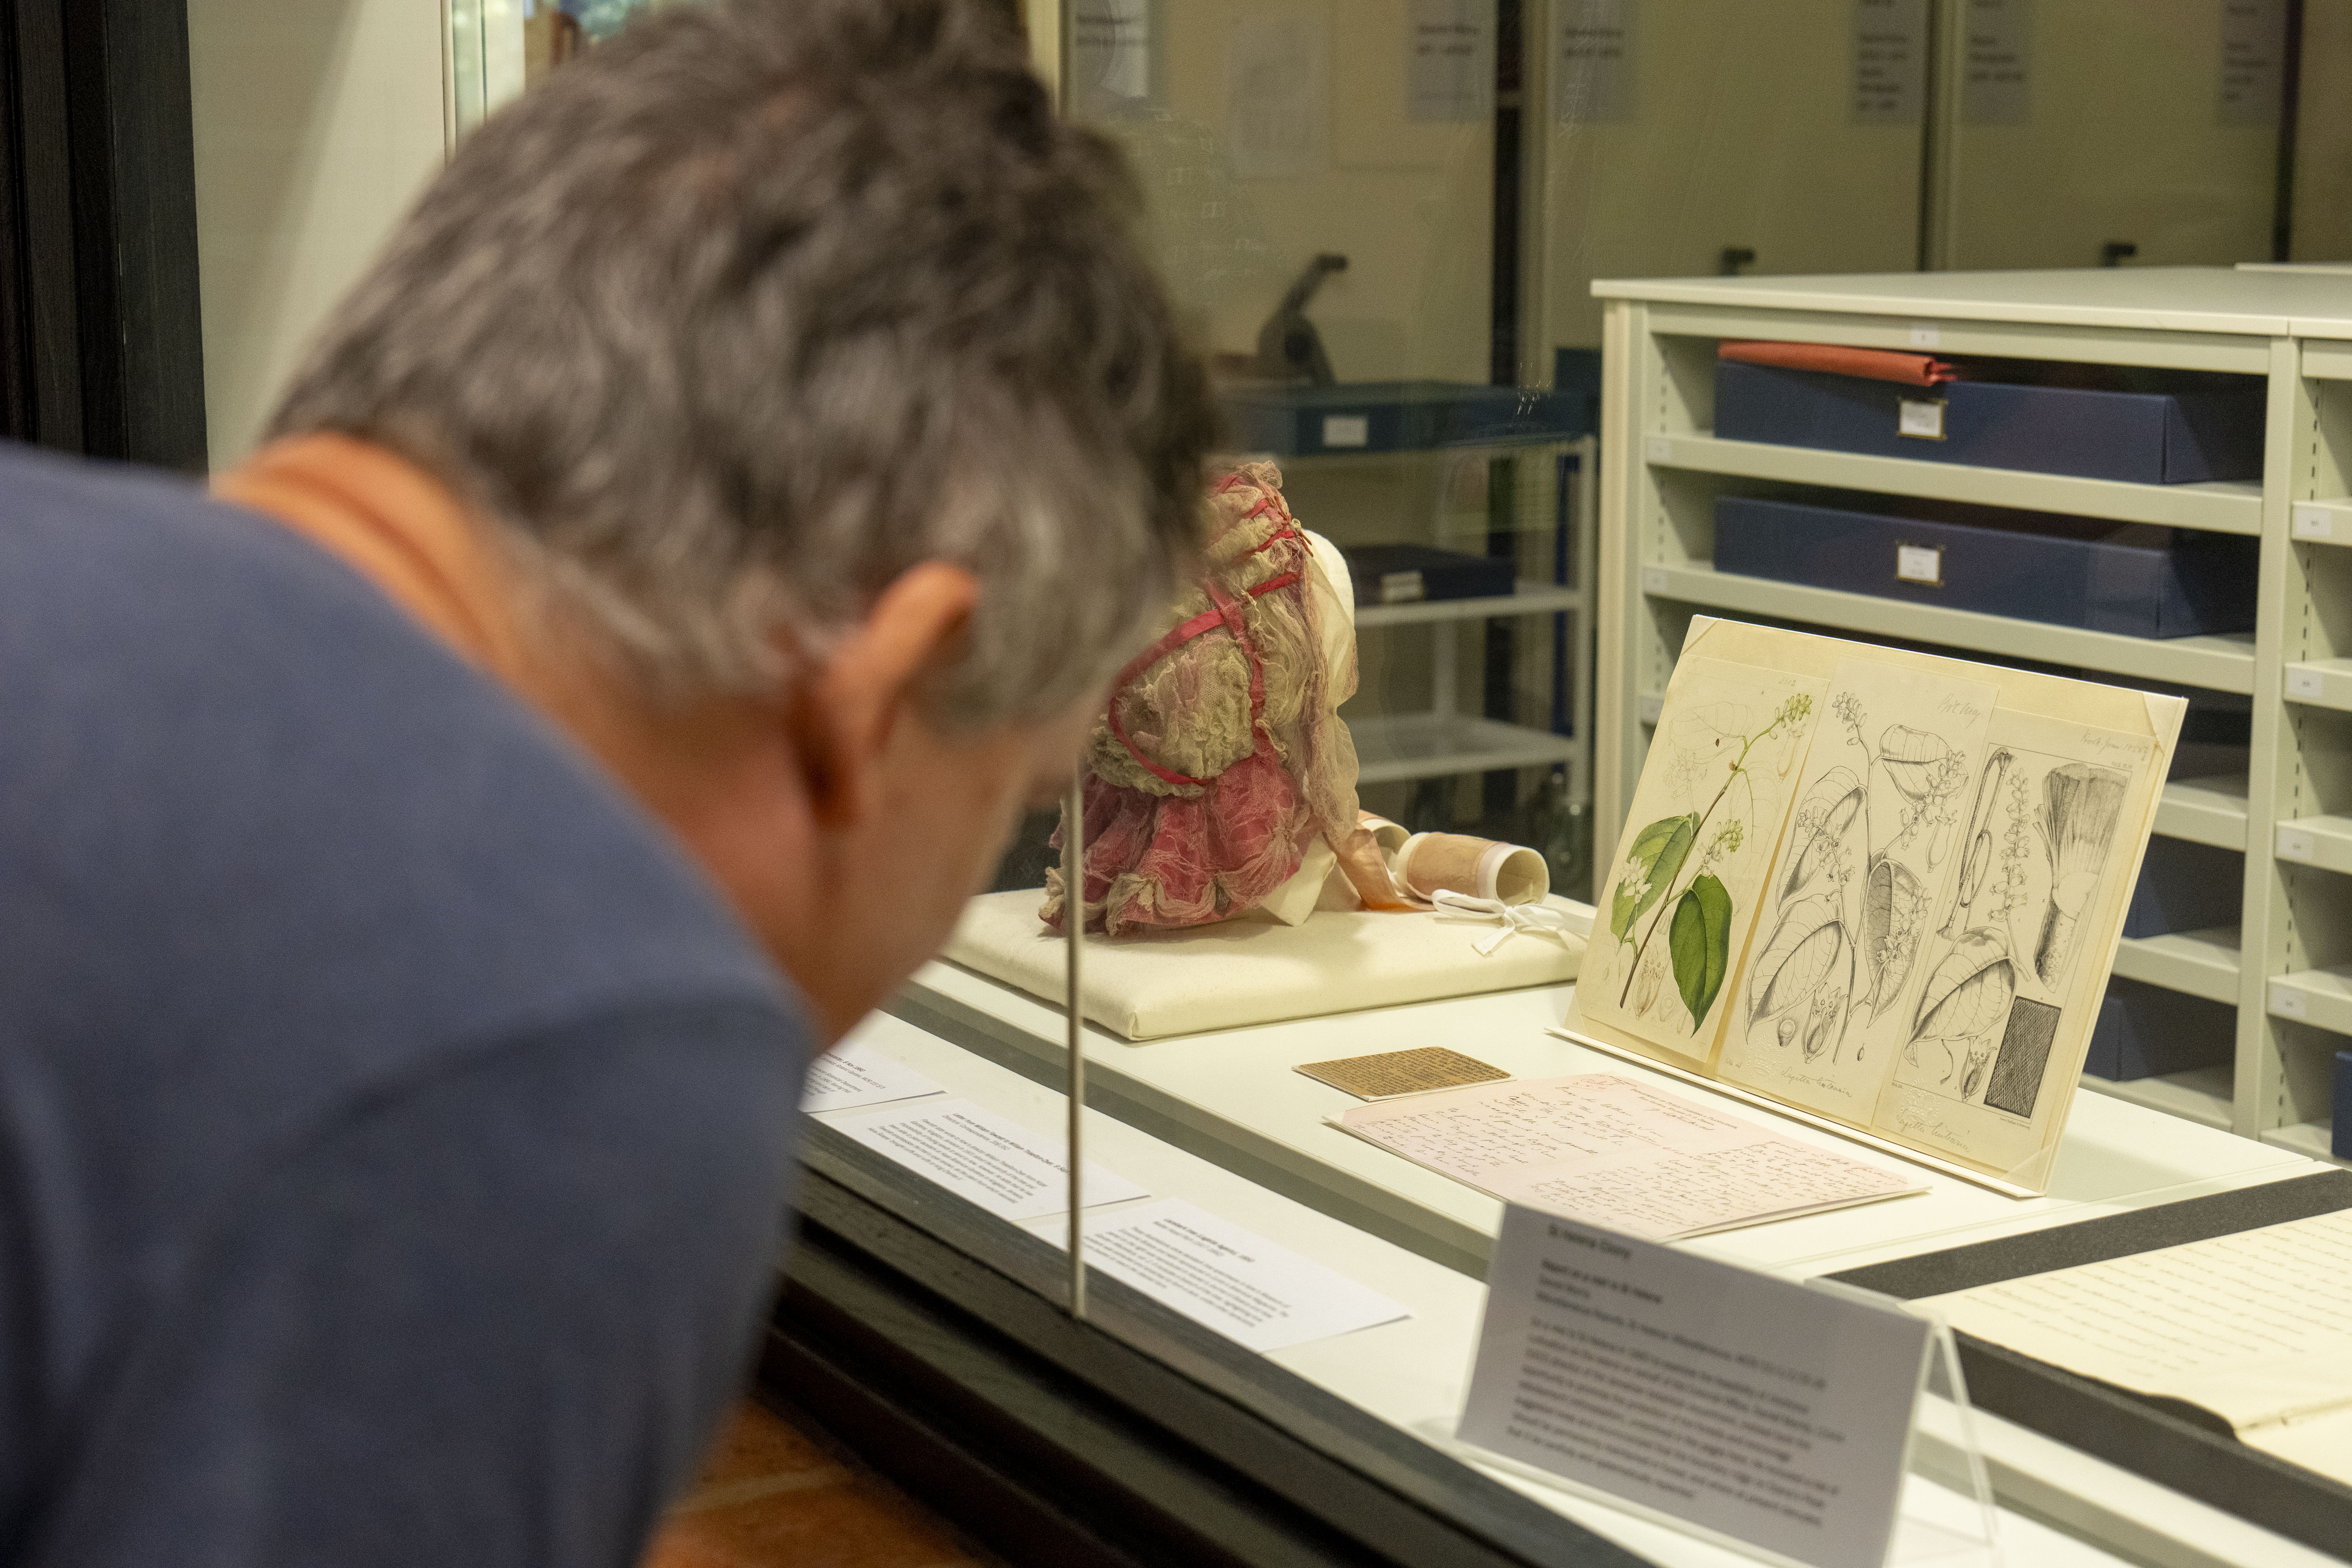 A man examines plant specimens in an exhibition